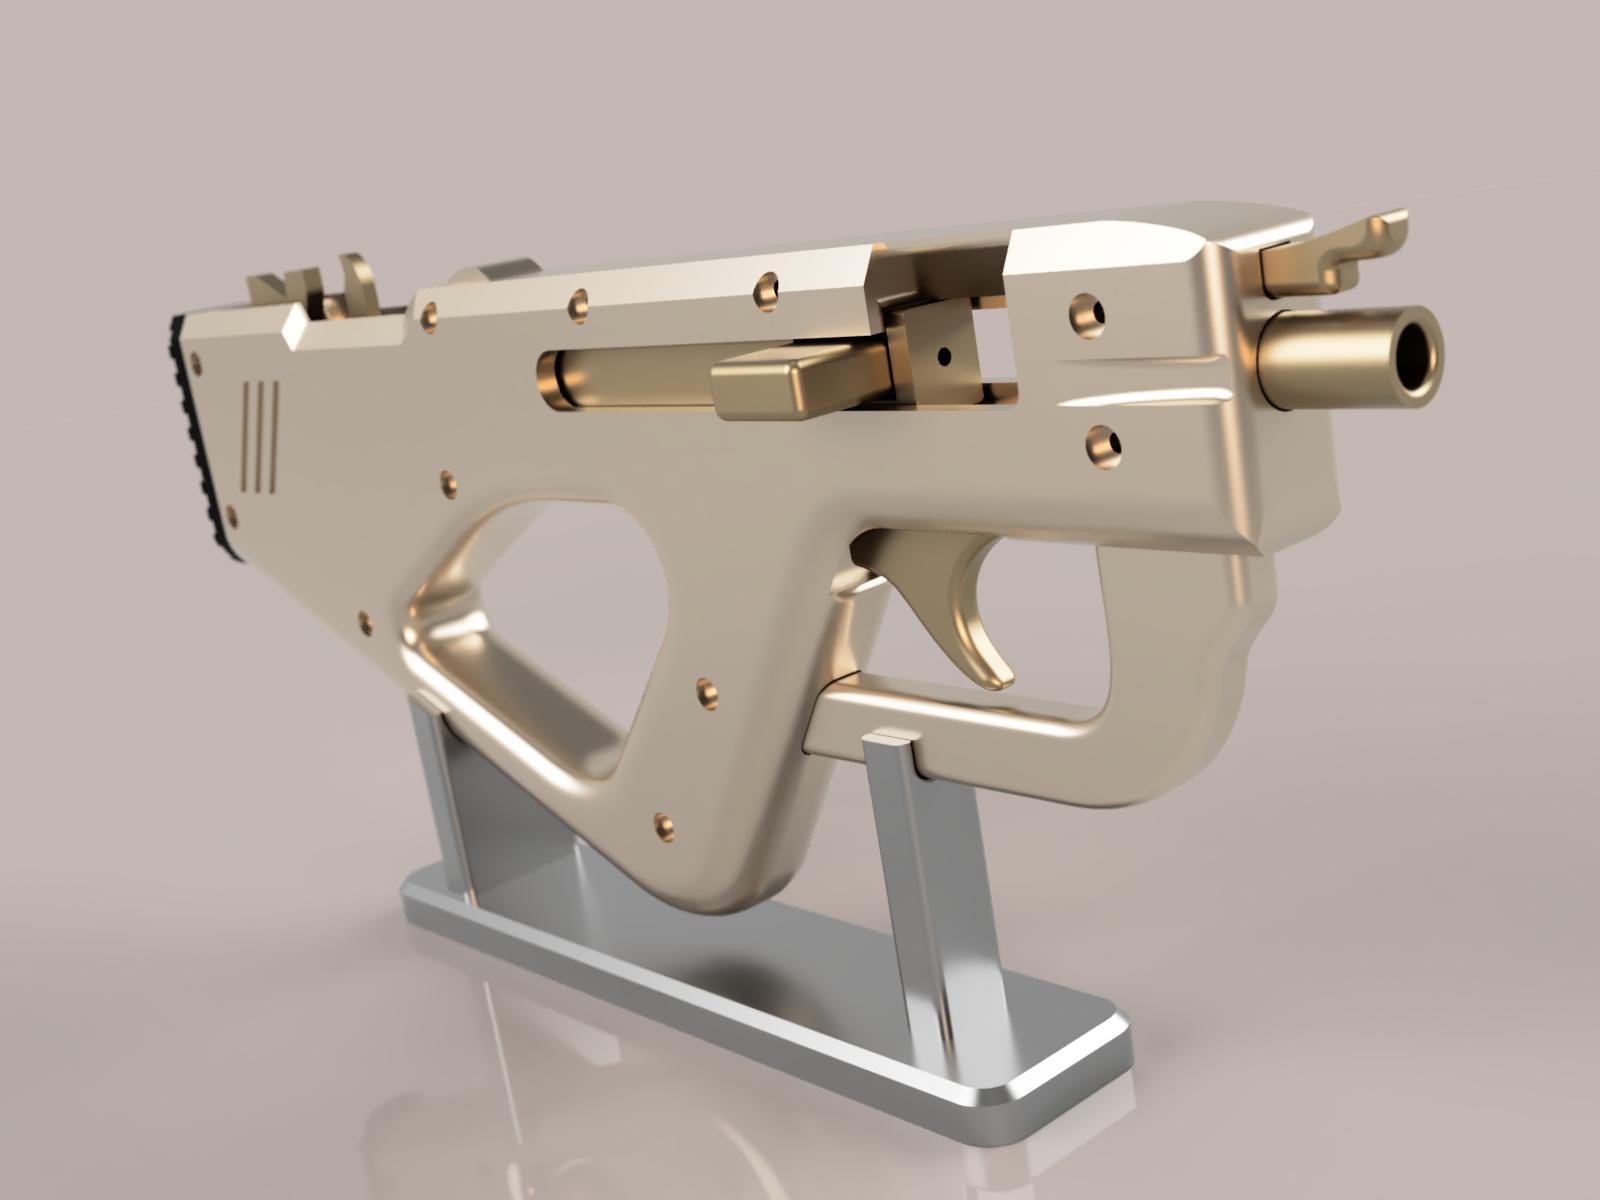 Full Auto Rubber Band SMG 3d model